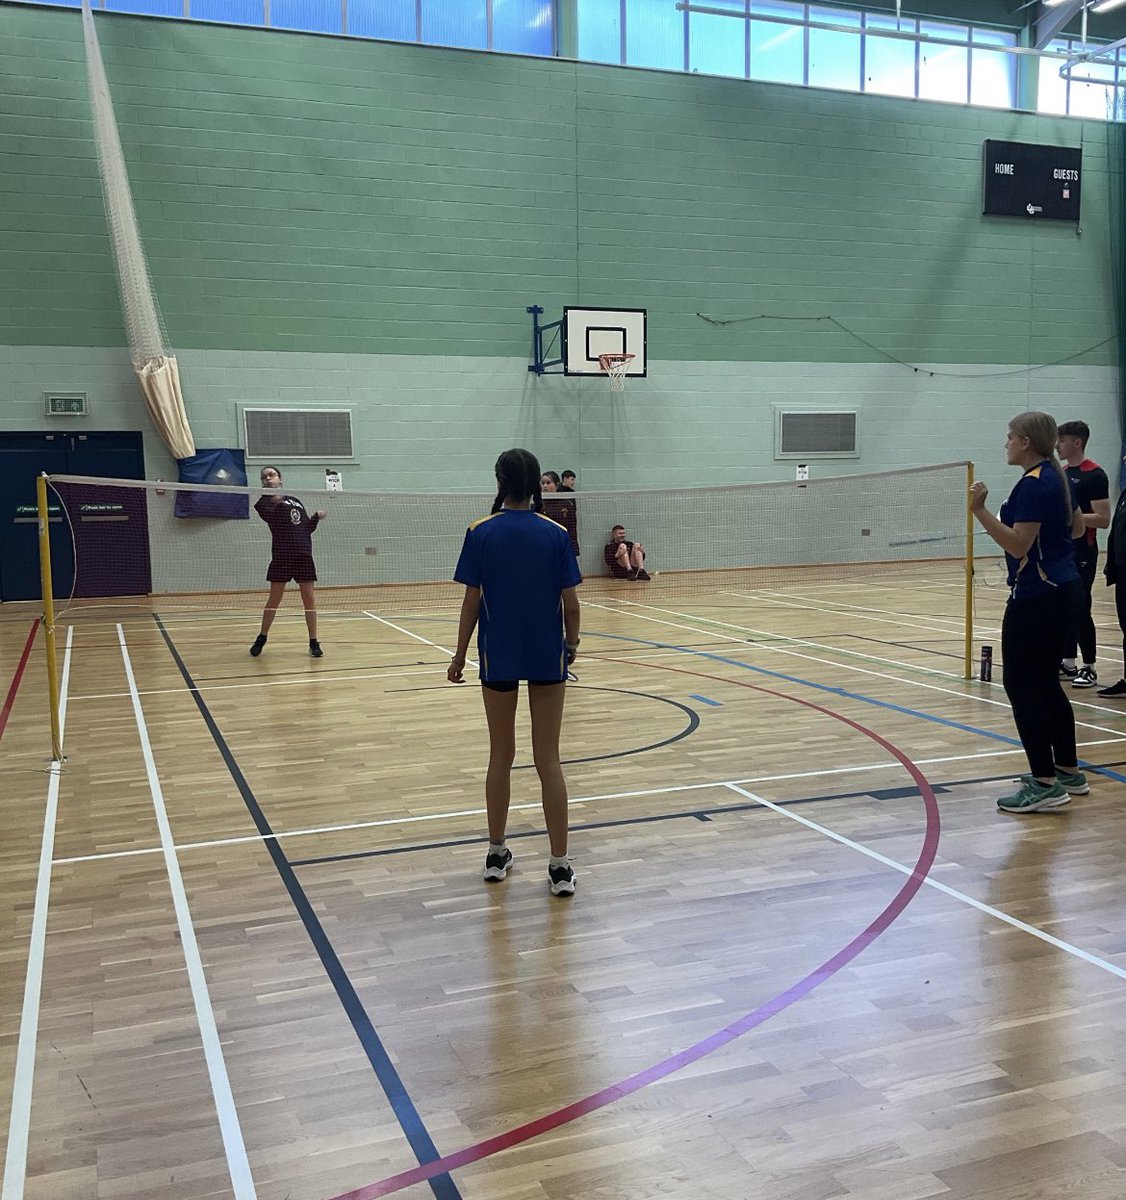 Fantastic day at the PASS badminton festival 🏸

Well done to all the pupils who took part and good luck to the winners/runners up who will represent NPT in the Welsh finals next month 👏🏻

Thank you to @NPTCGetActive & @BadmintonWales for your support throughout the day 😃